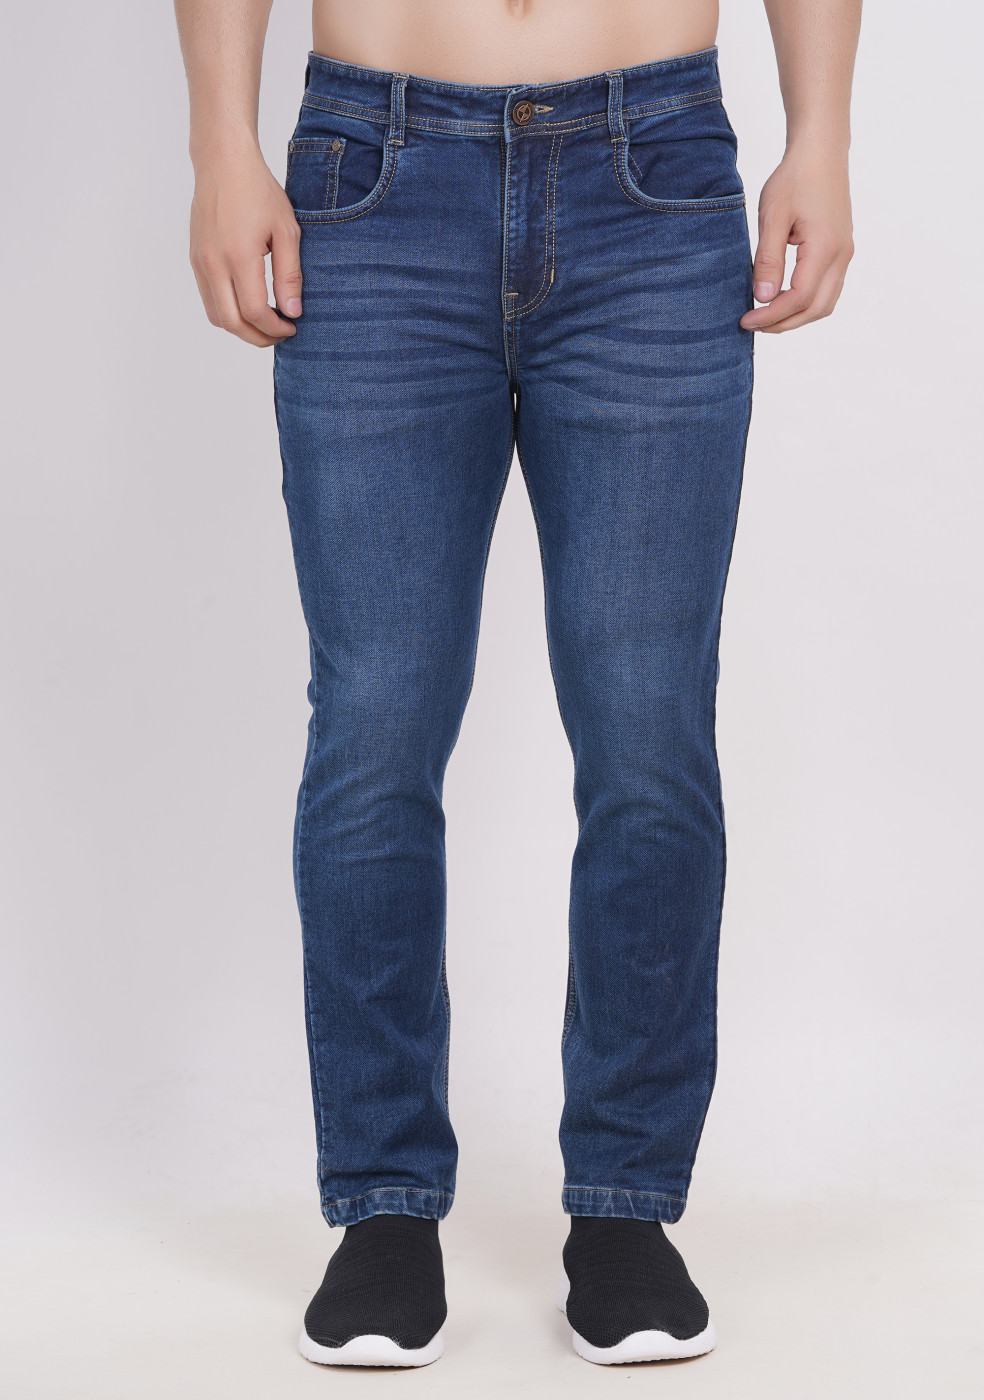 Jeans pant for Men